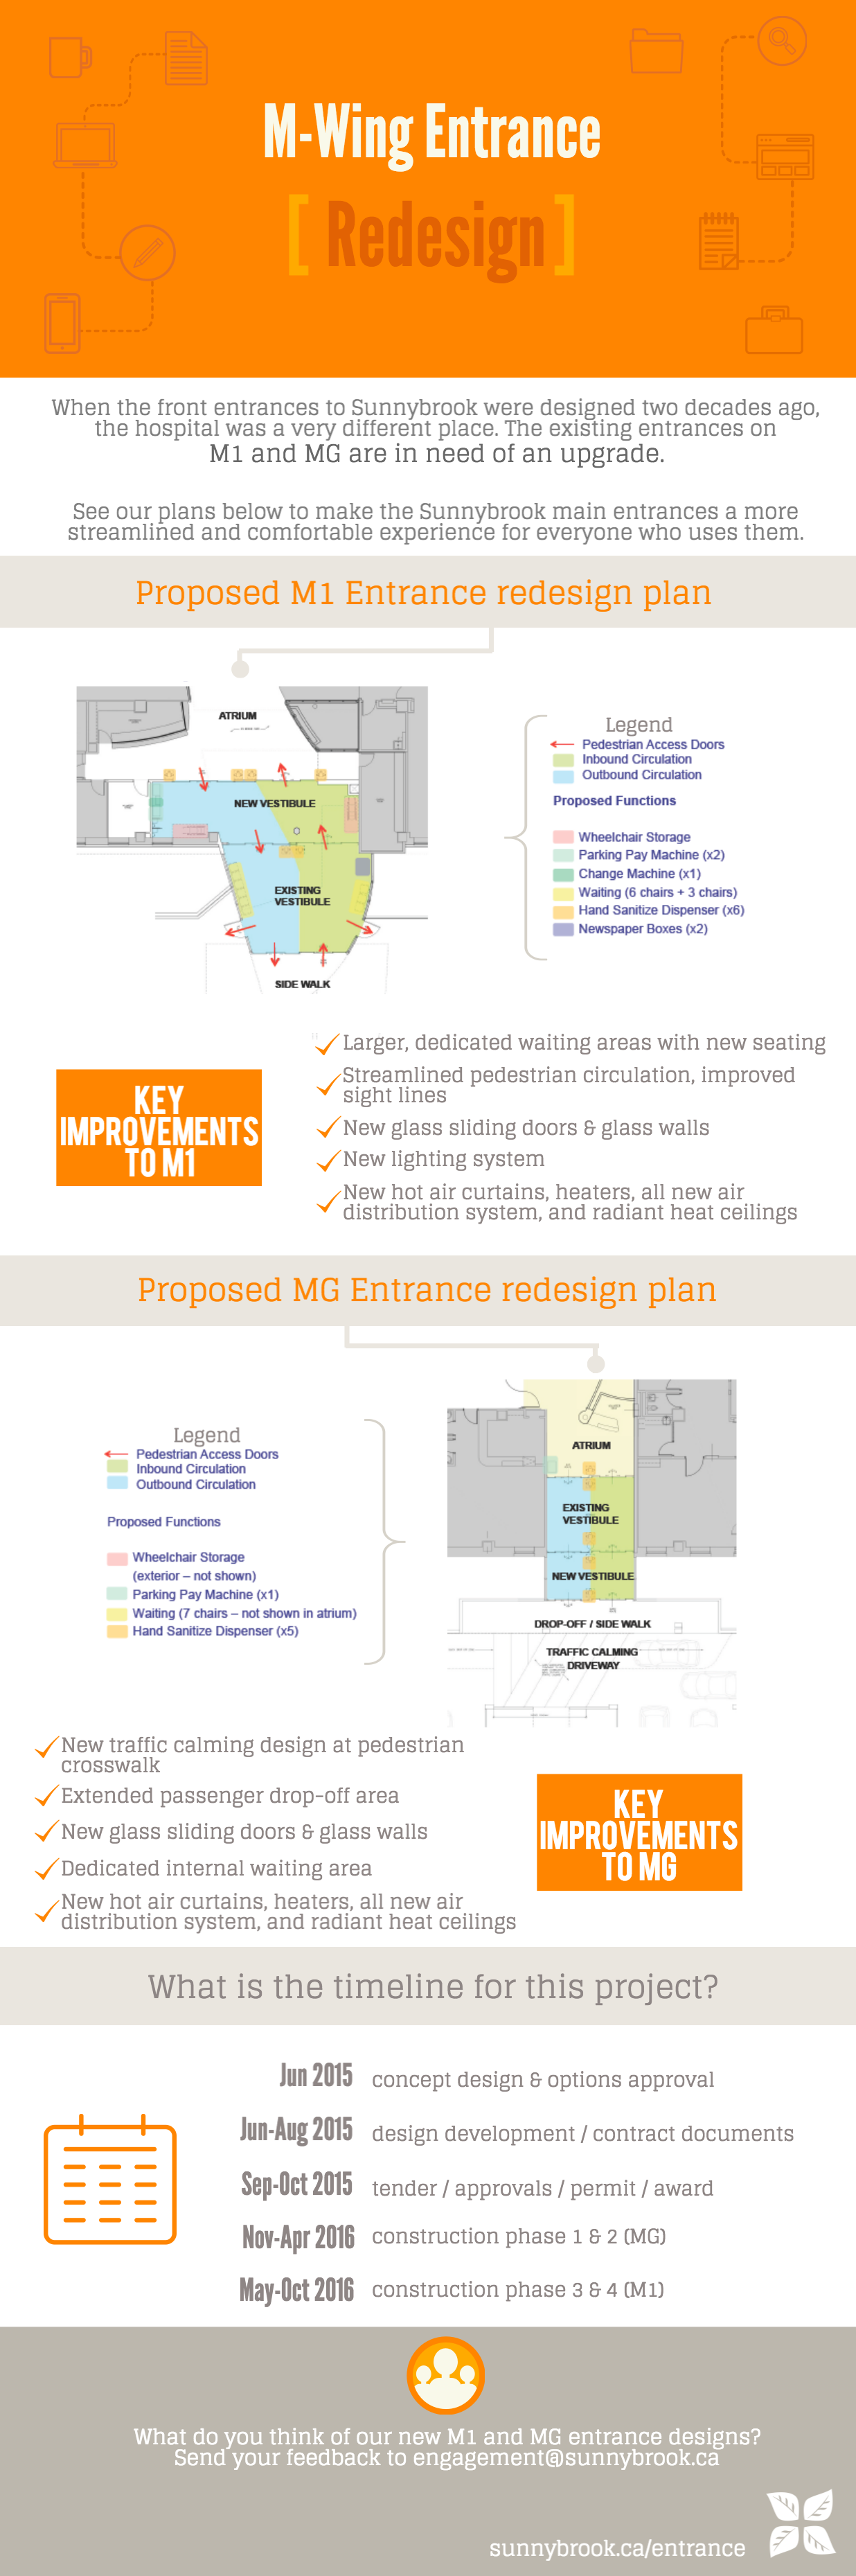 M-Wing entrance redesign infographic - Accessible text follows